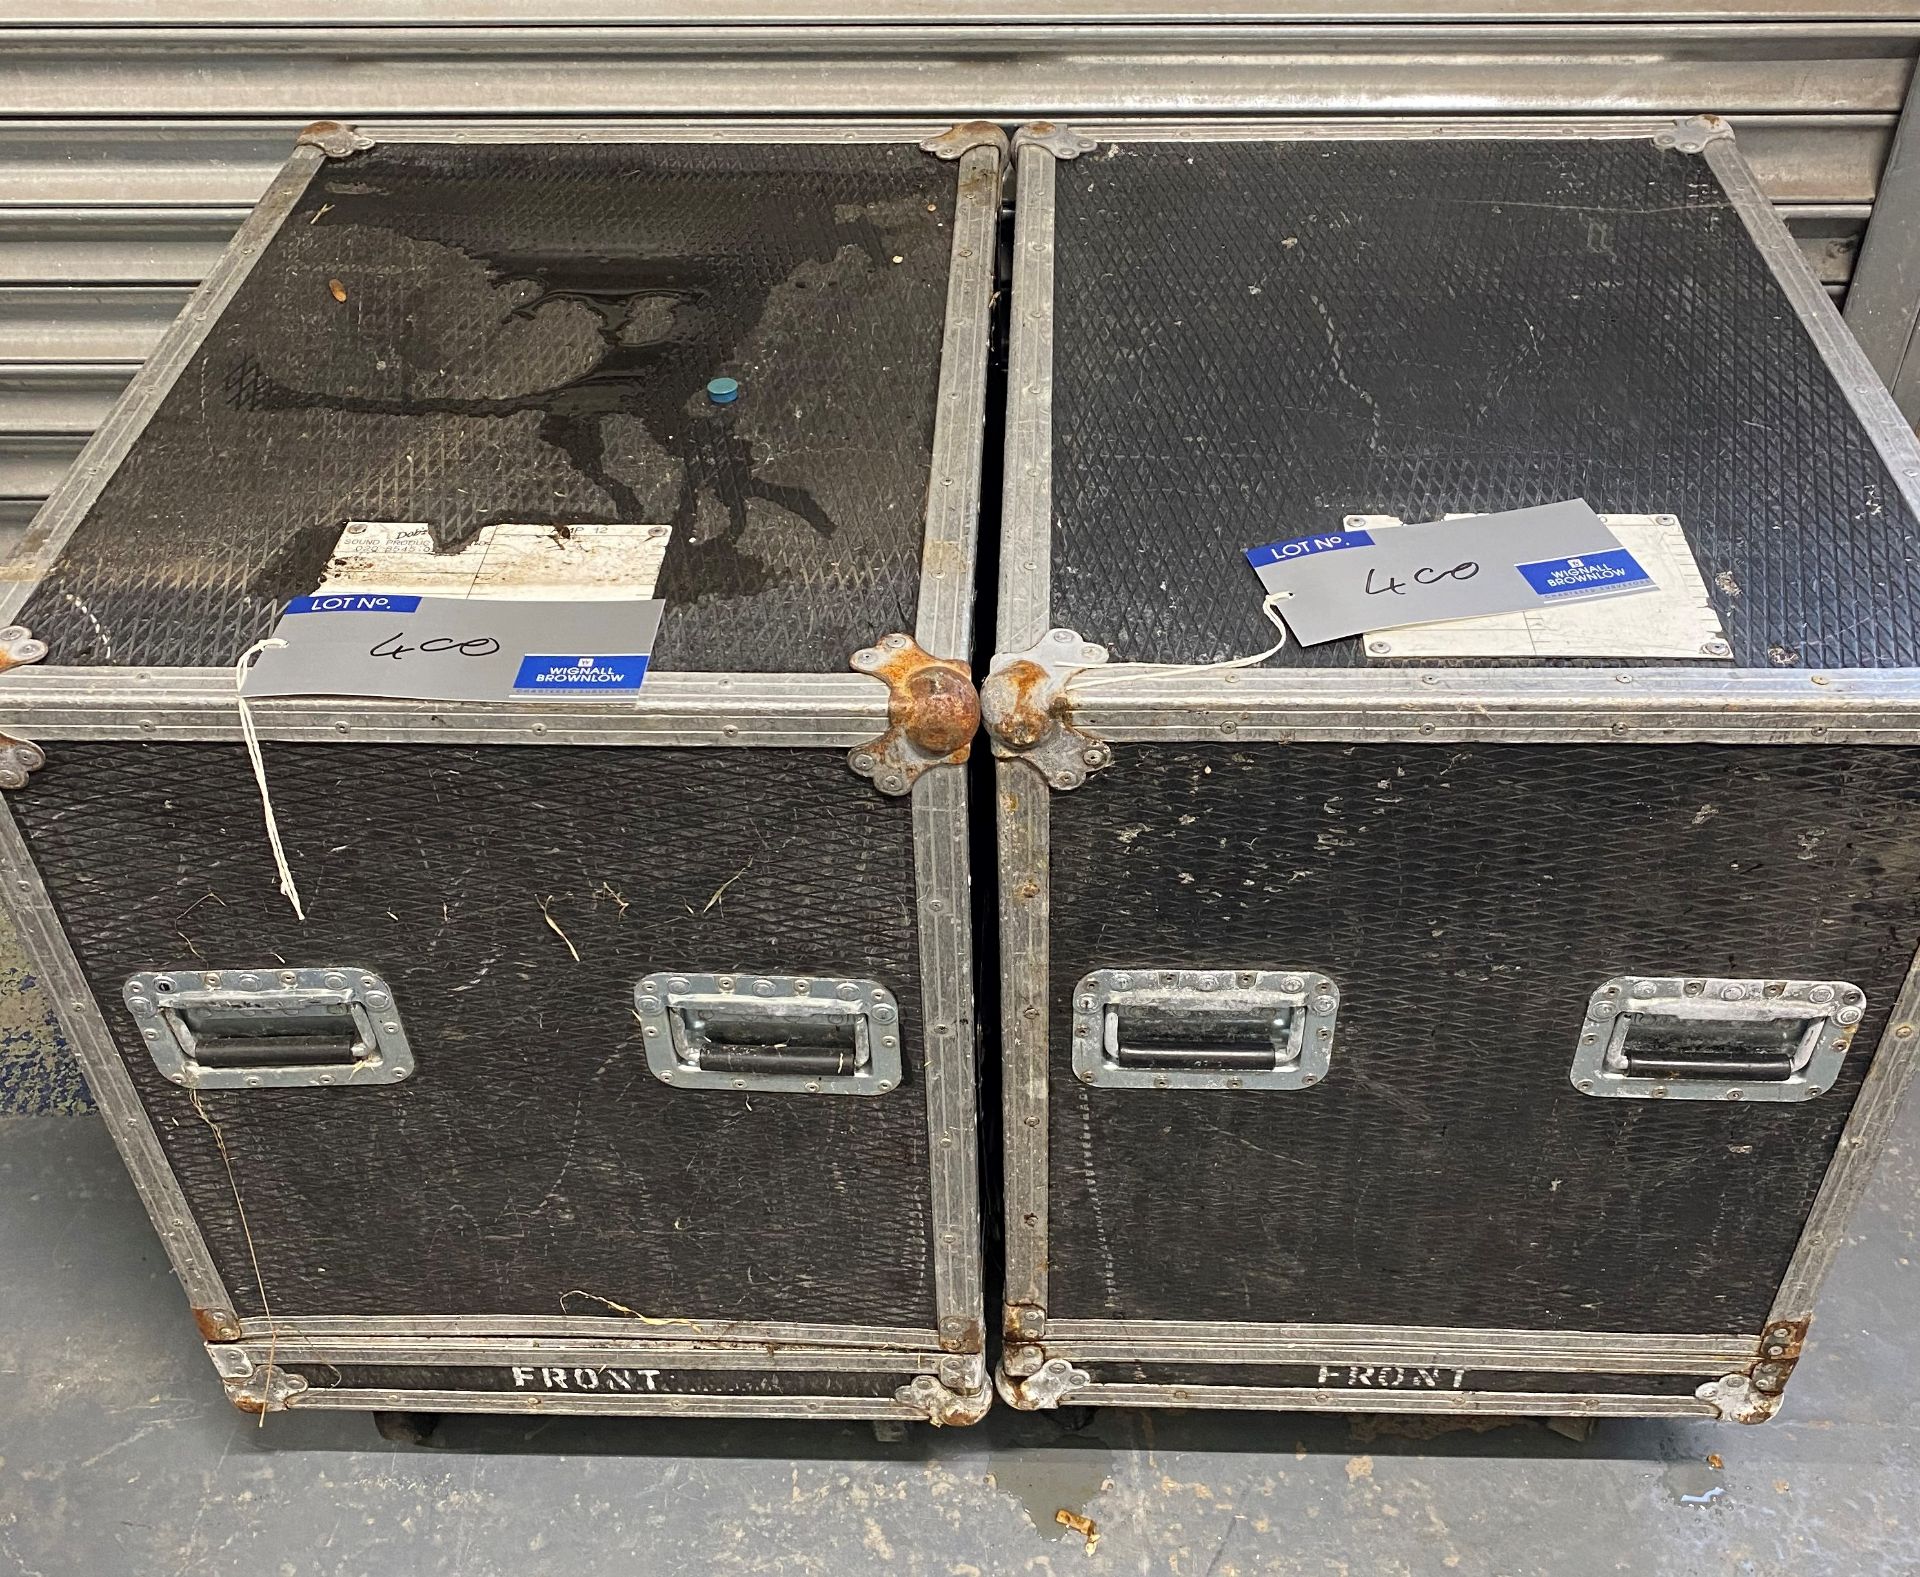 2 Mobile Flight Cases, 760mm x 560mm x 680mm (need repairs)(located at 17 Deer Park Road, London, - Image 2 of 2